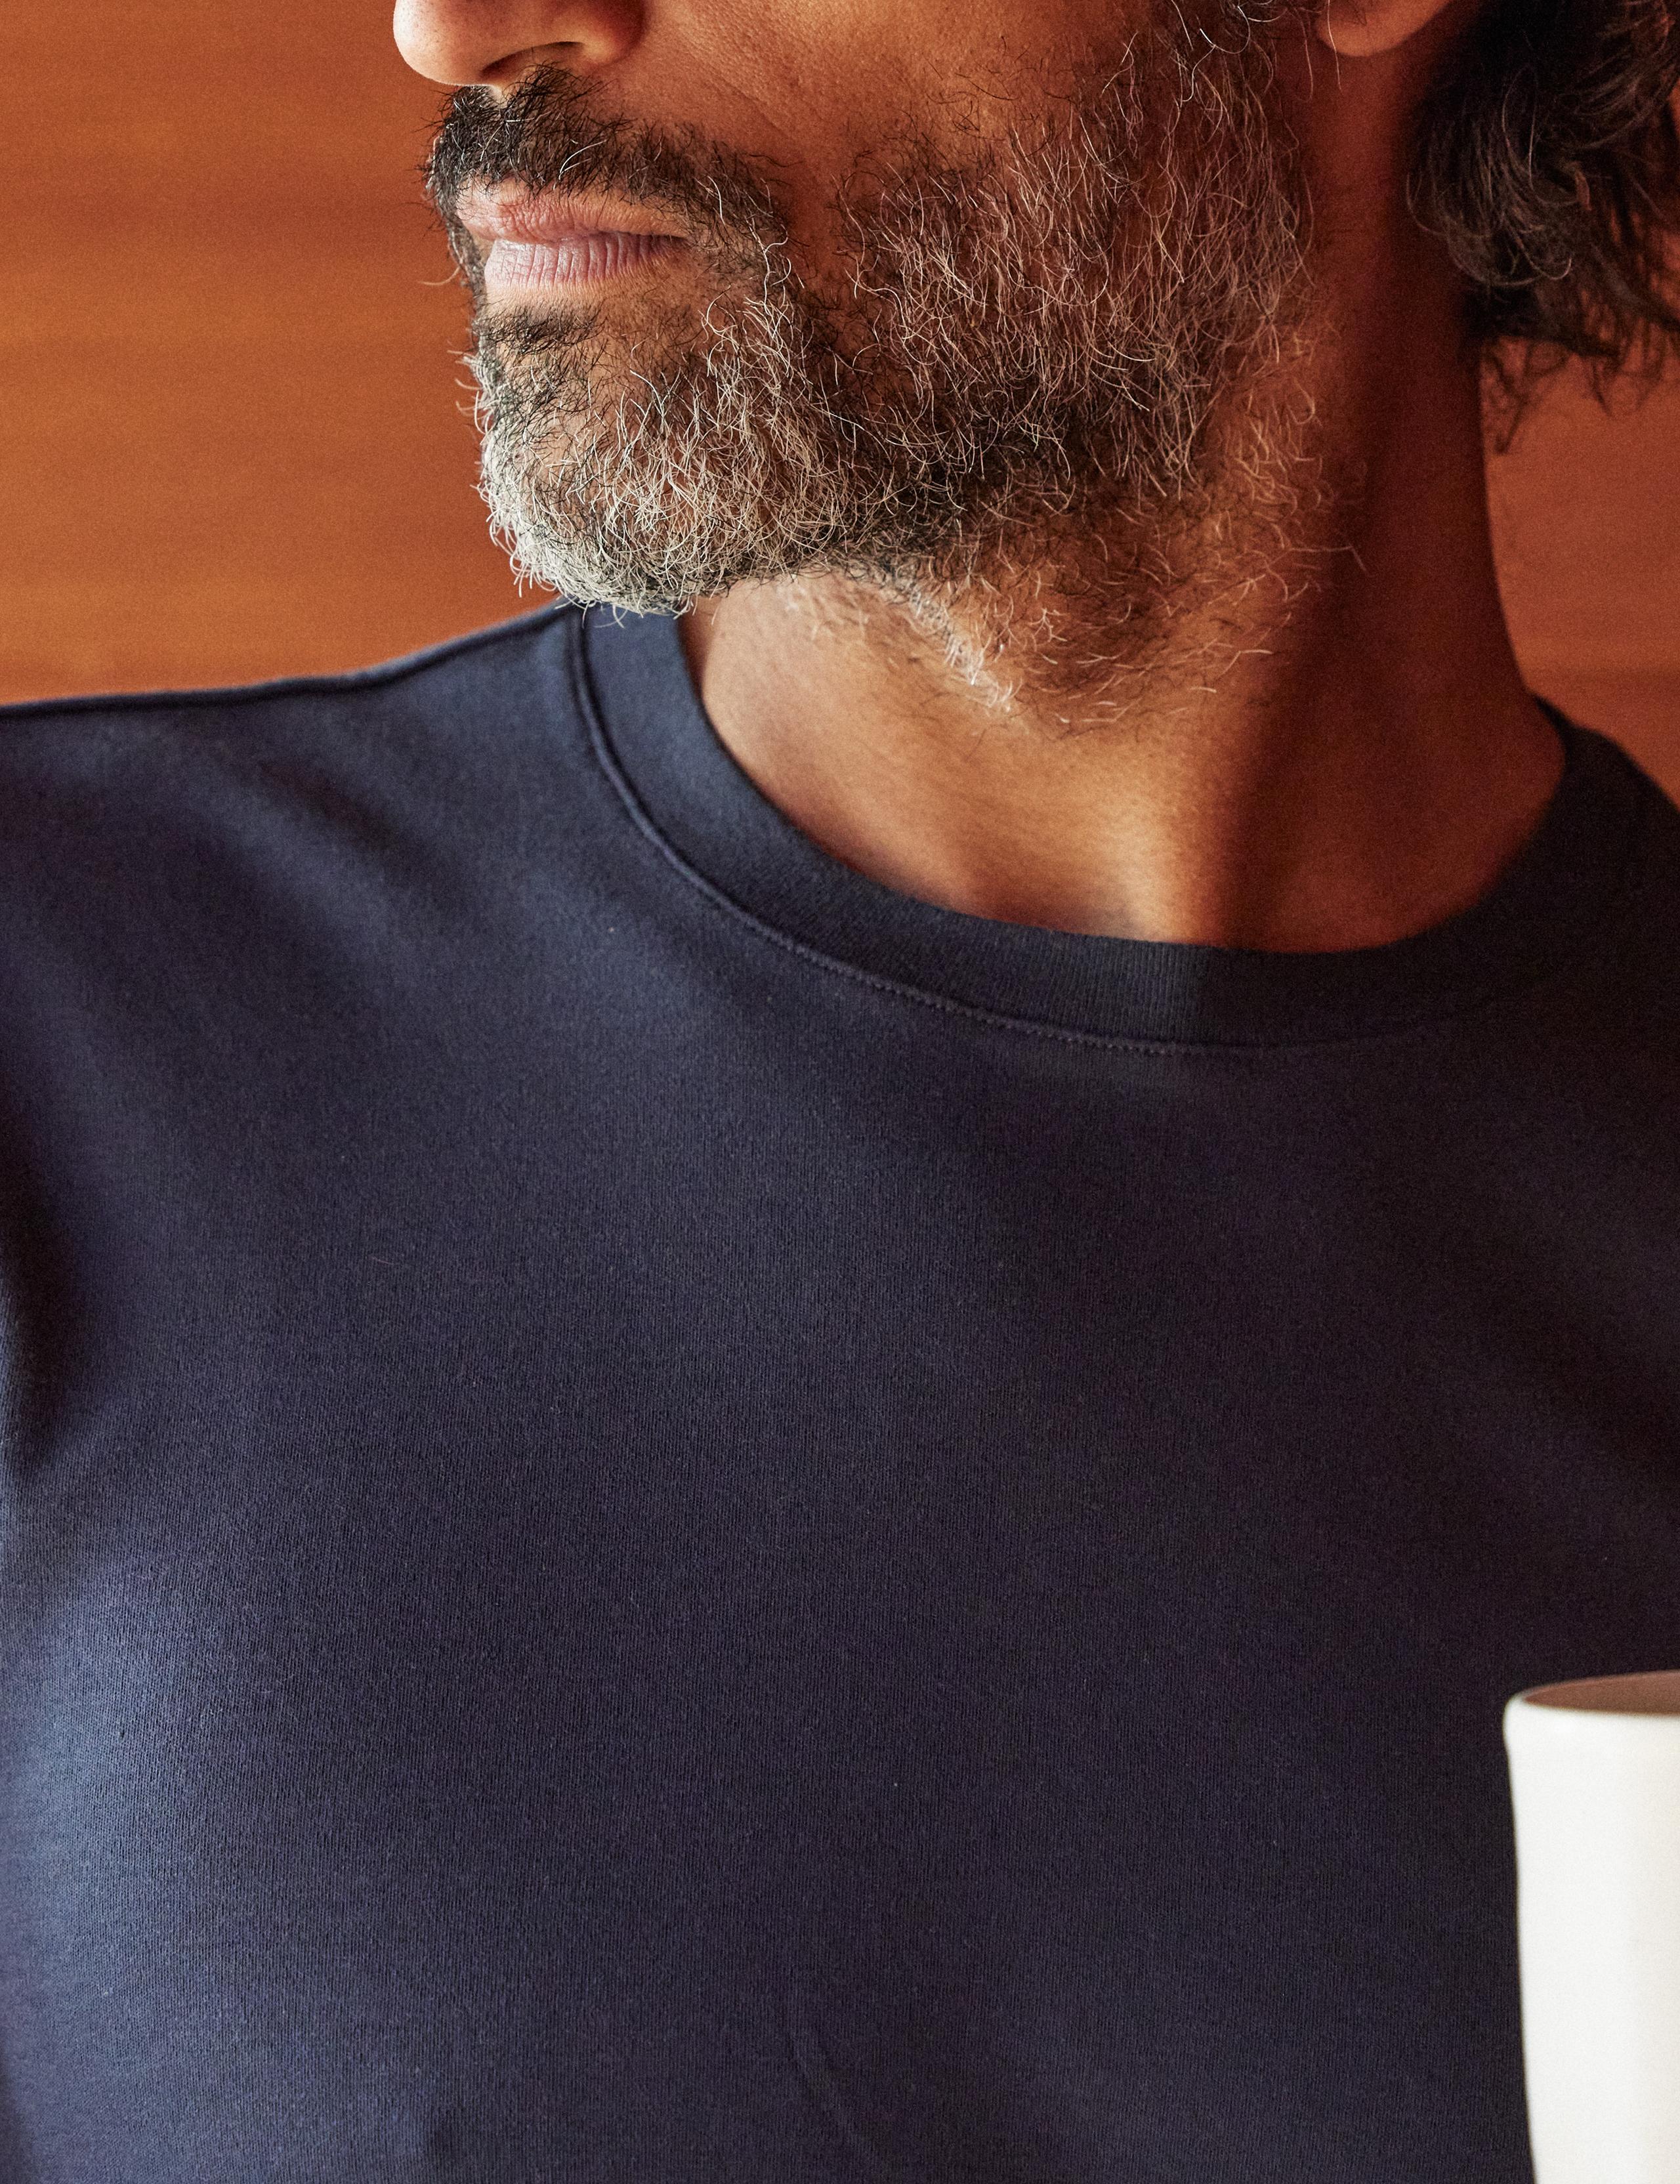 Neckline detail of man wearing Relaxed-Fit Crew Tee